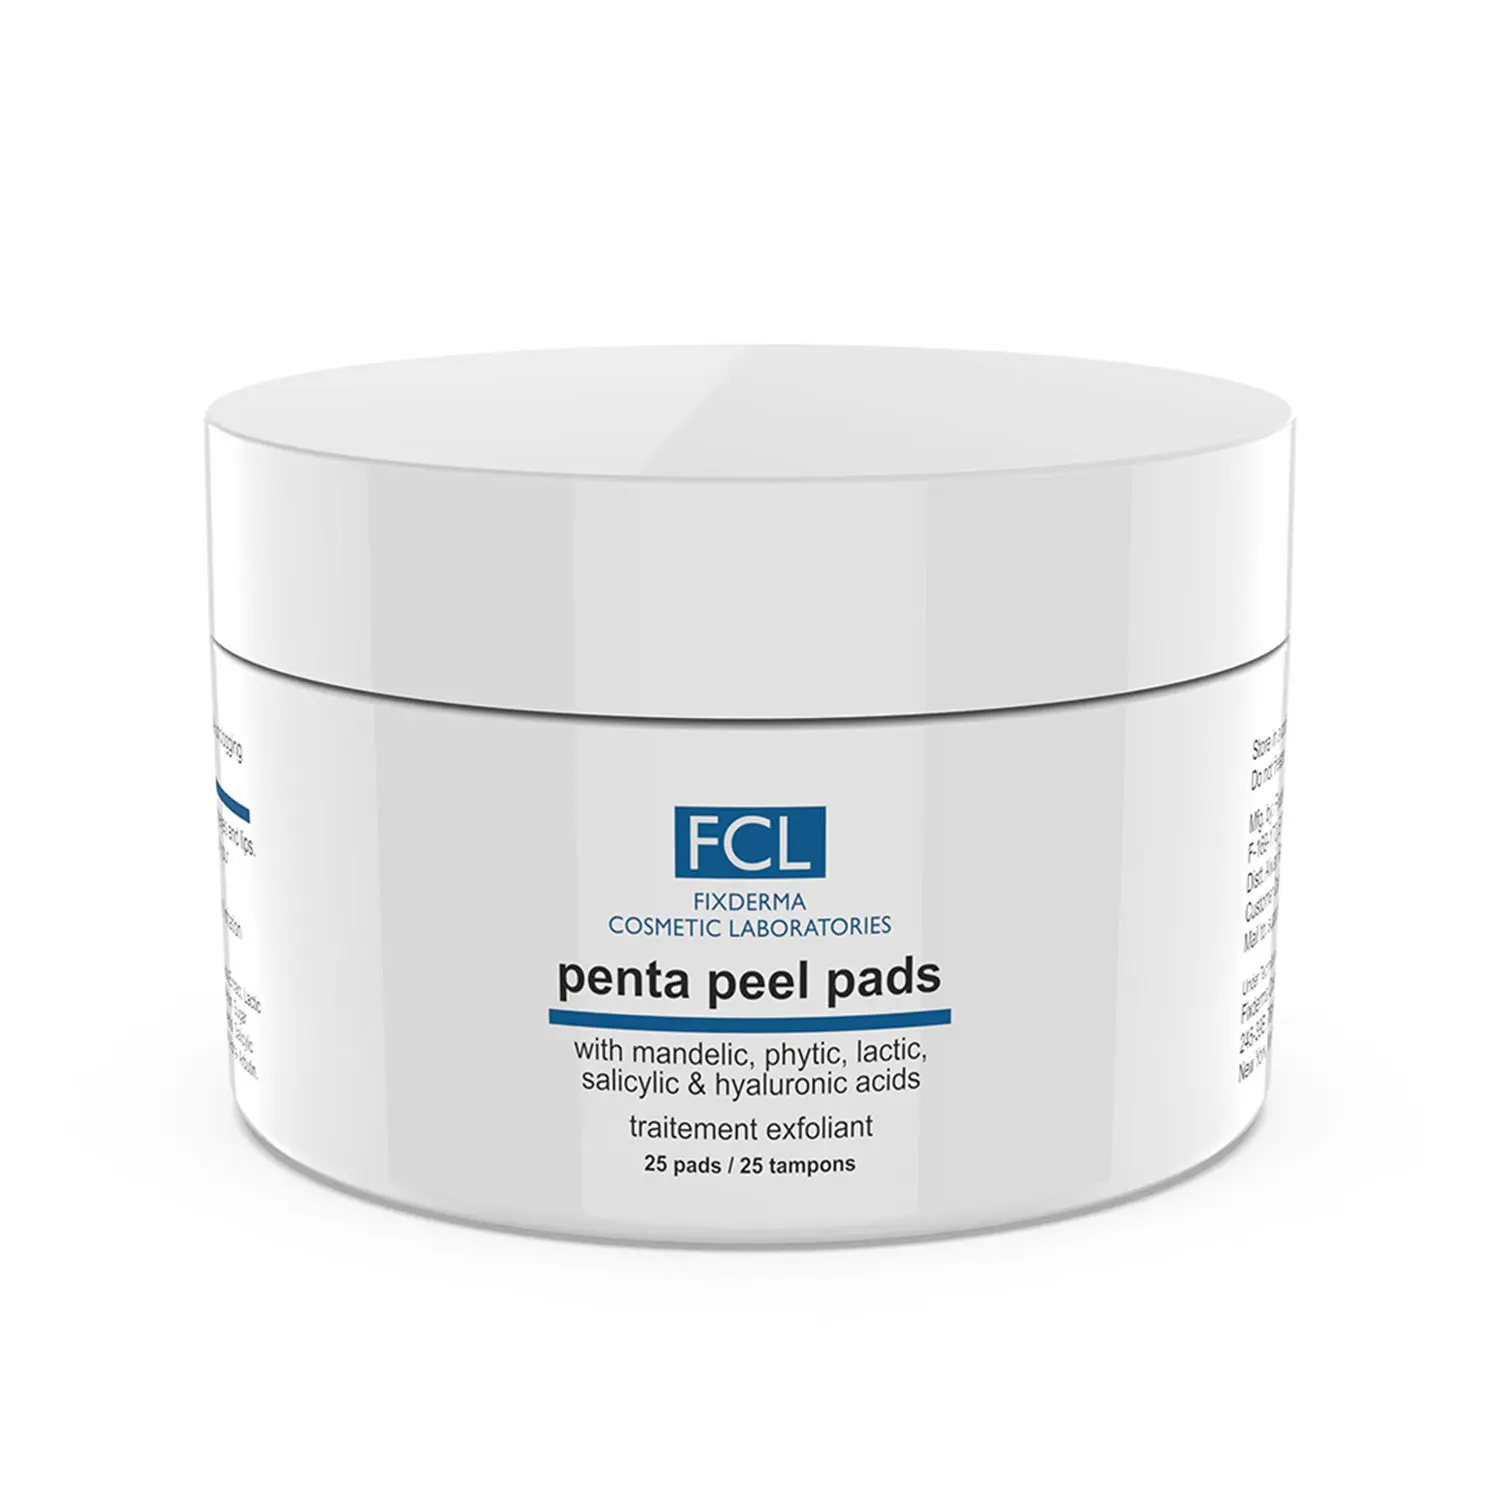 Fixderma Cosmetic Laboratories Penta Peel Pads Refining Peel Treatment, Removes Dead Cells and Even Tone Skin 25 Pads Pack 100gm